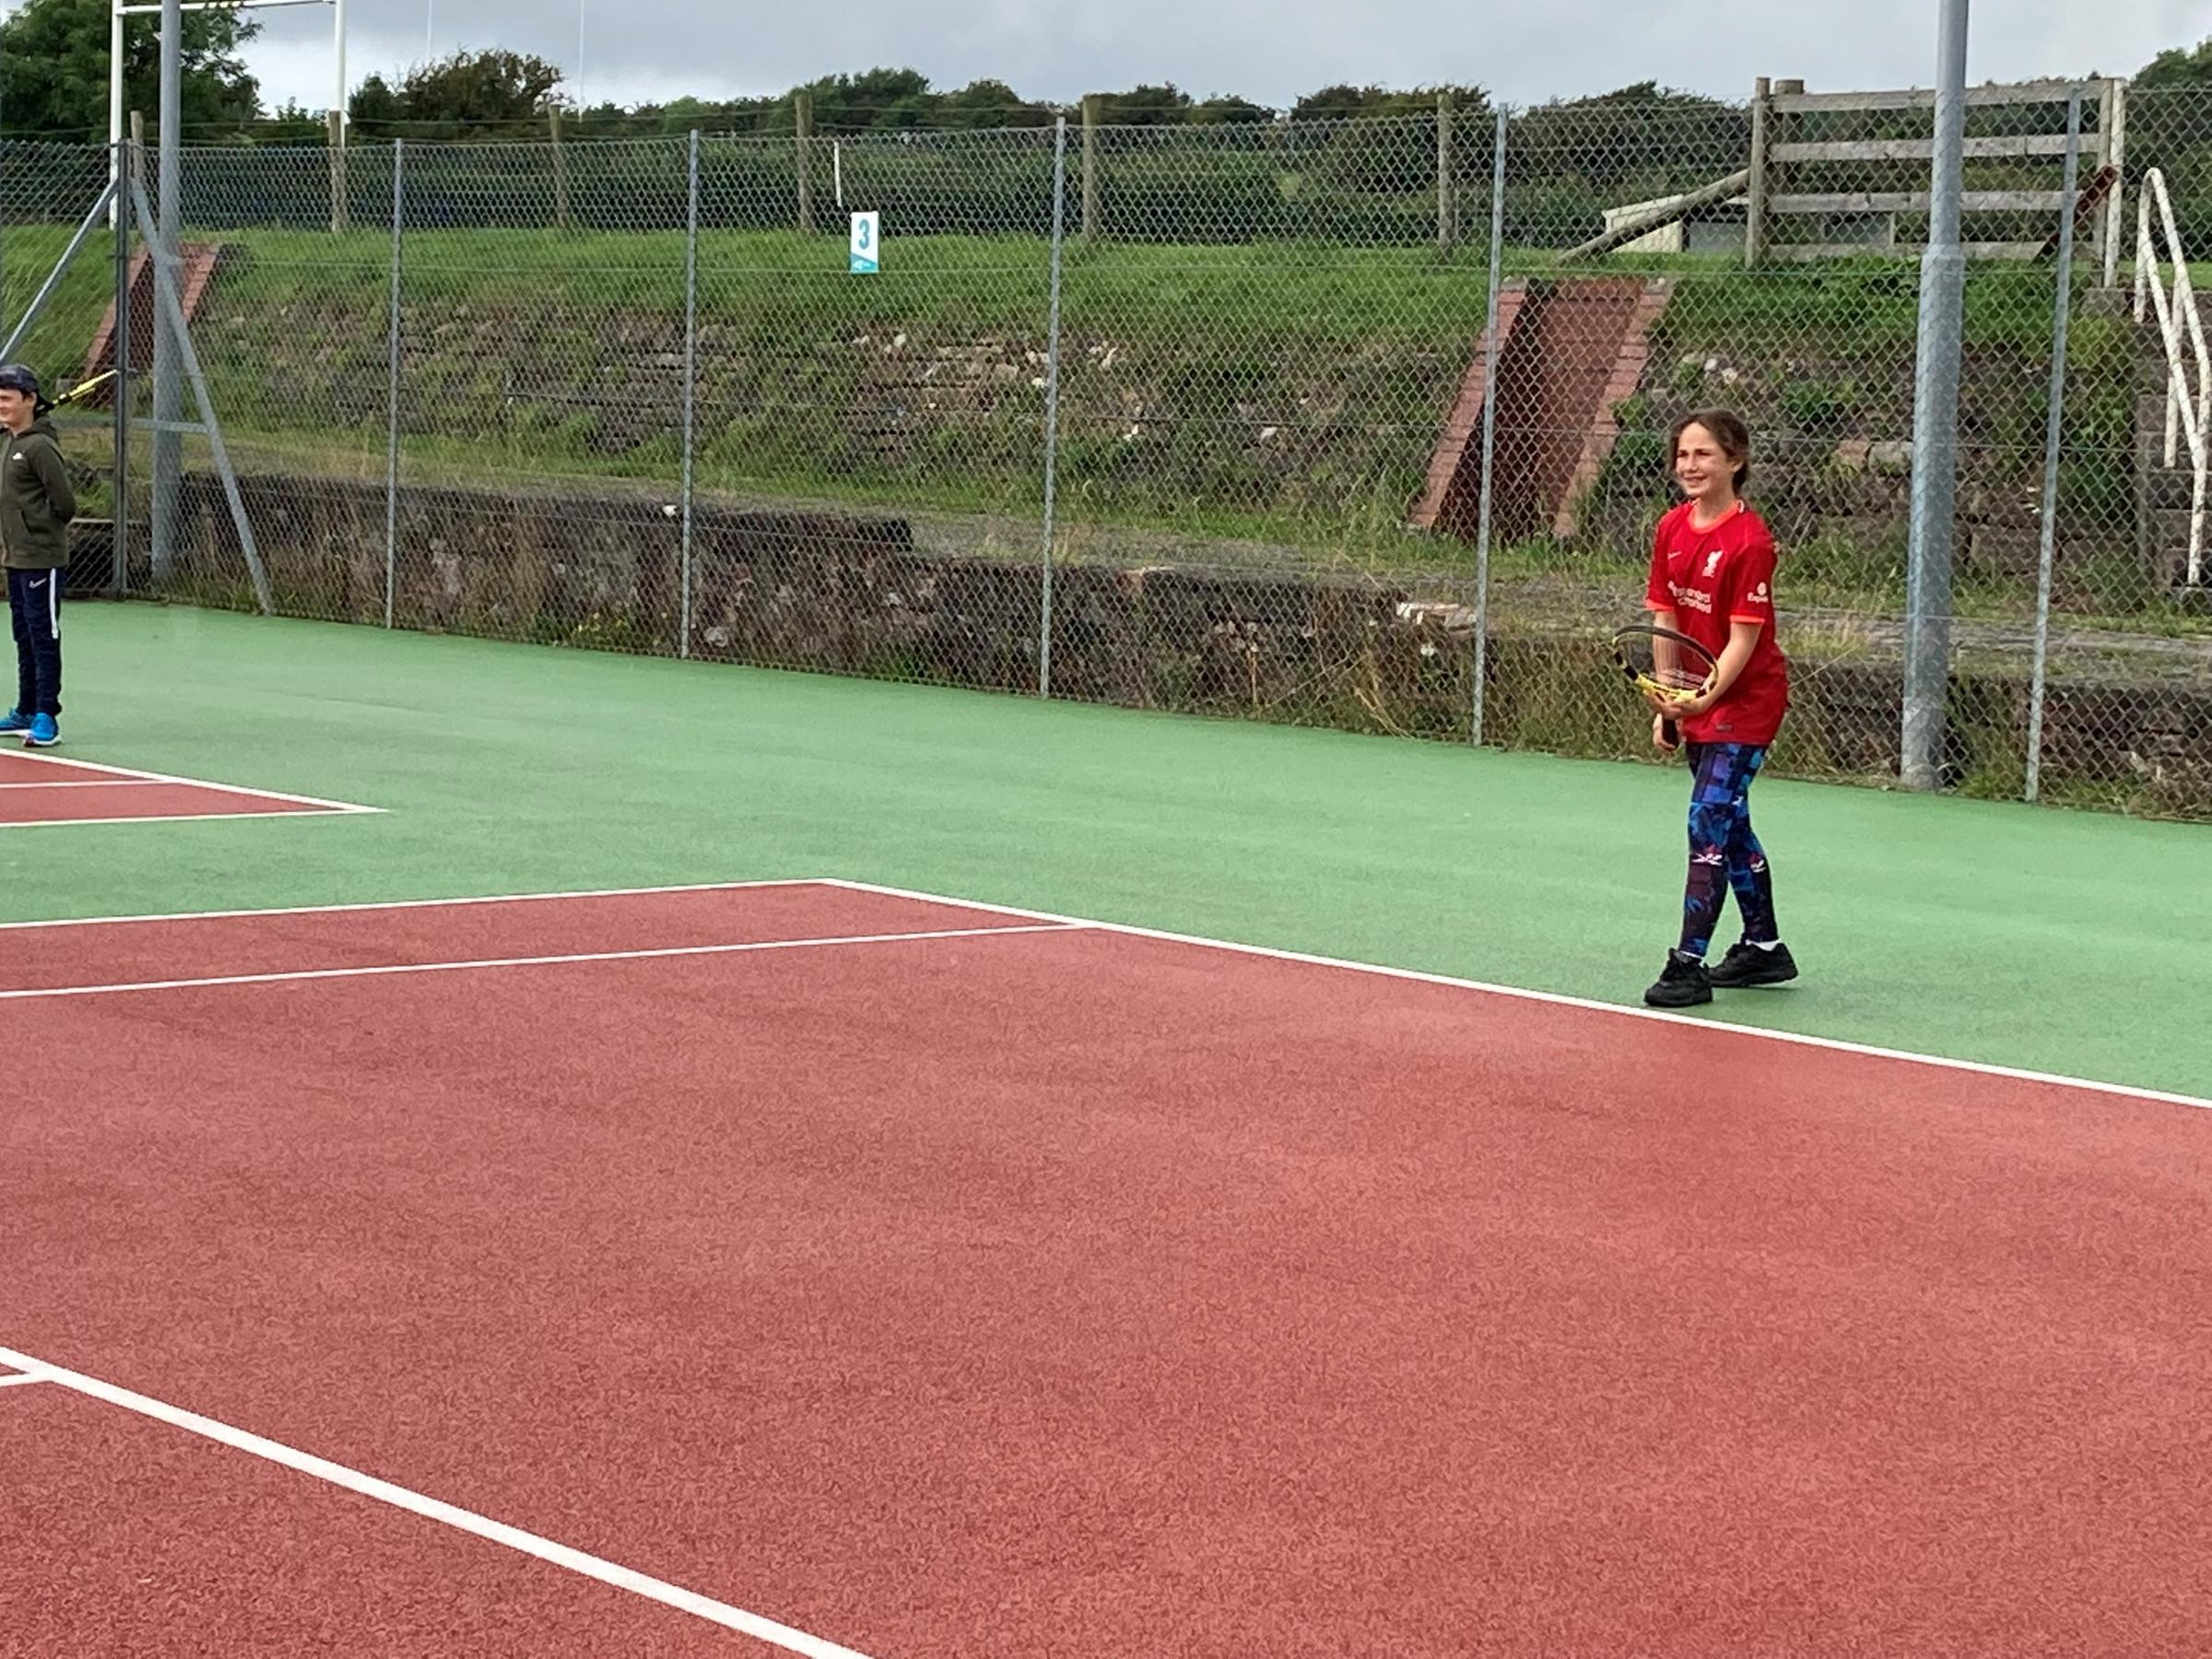 STAR: Leah Santos ready to return on Hawcoat Parks newly opened tennis courts